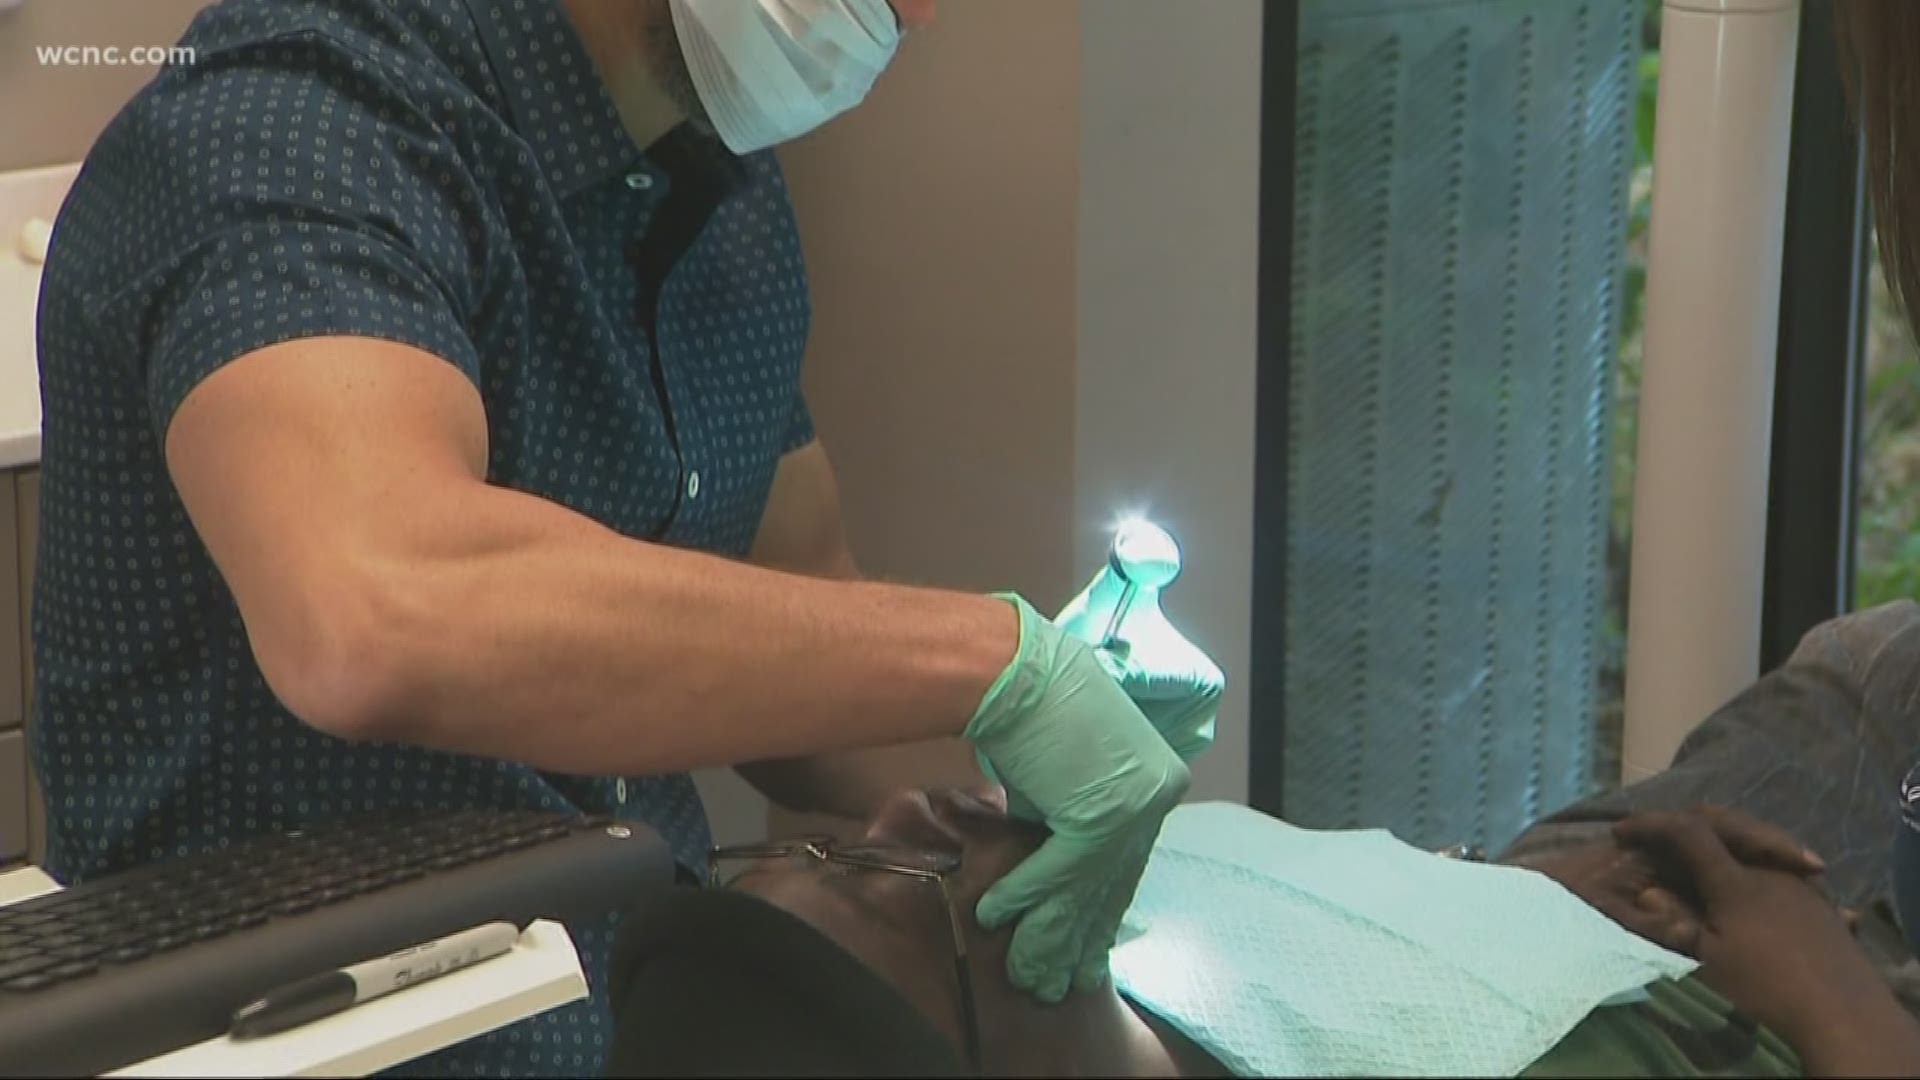 They served roughly 100 veterans on November 9 with dental care adding up to $70,000.